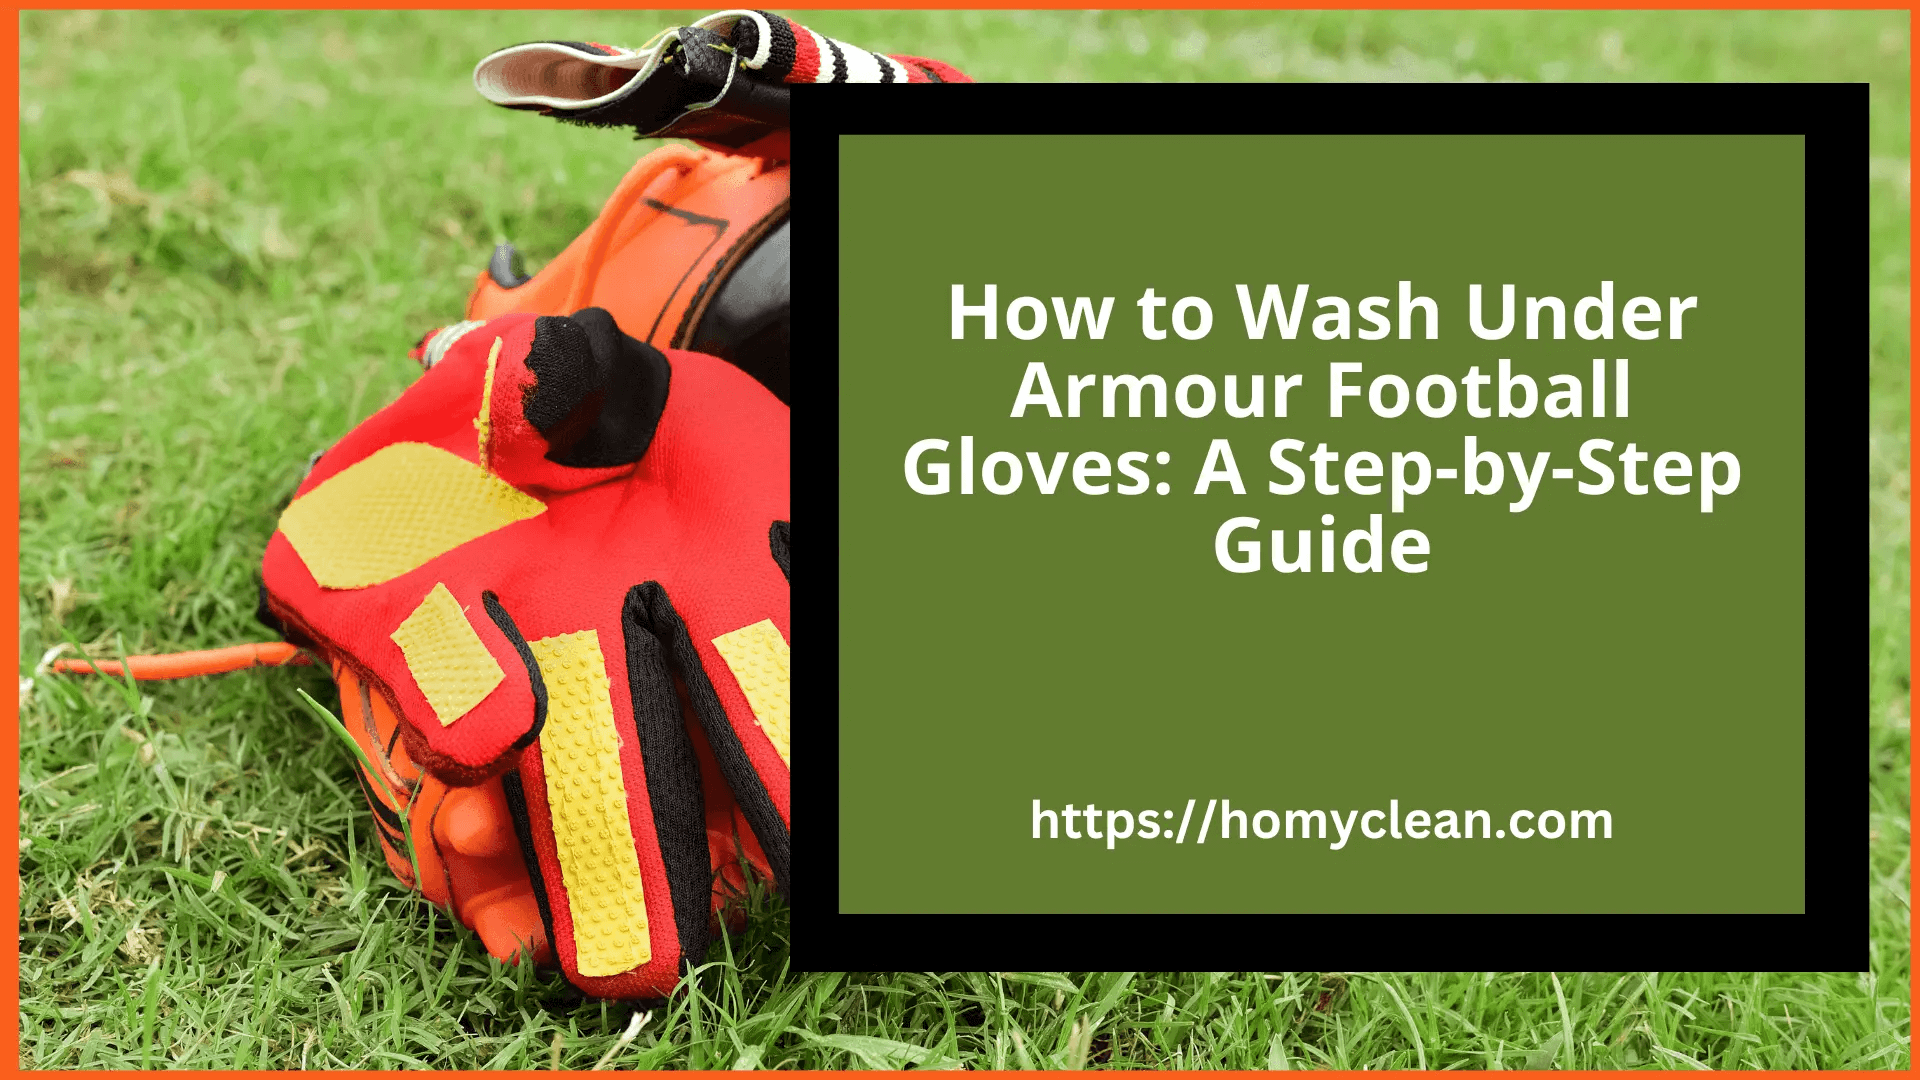 How to Wash Under Armour Football Gloves